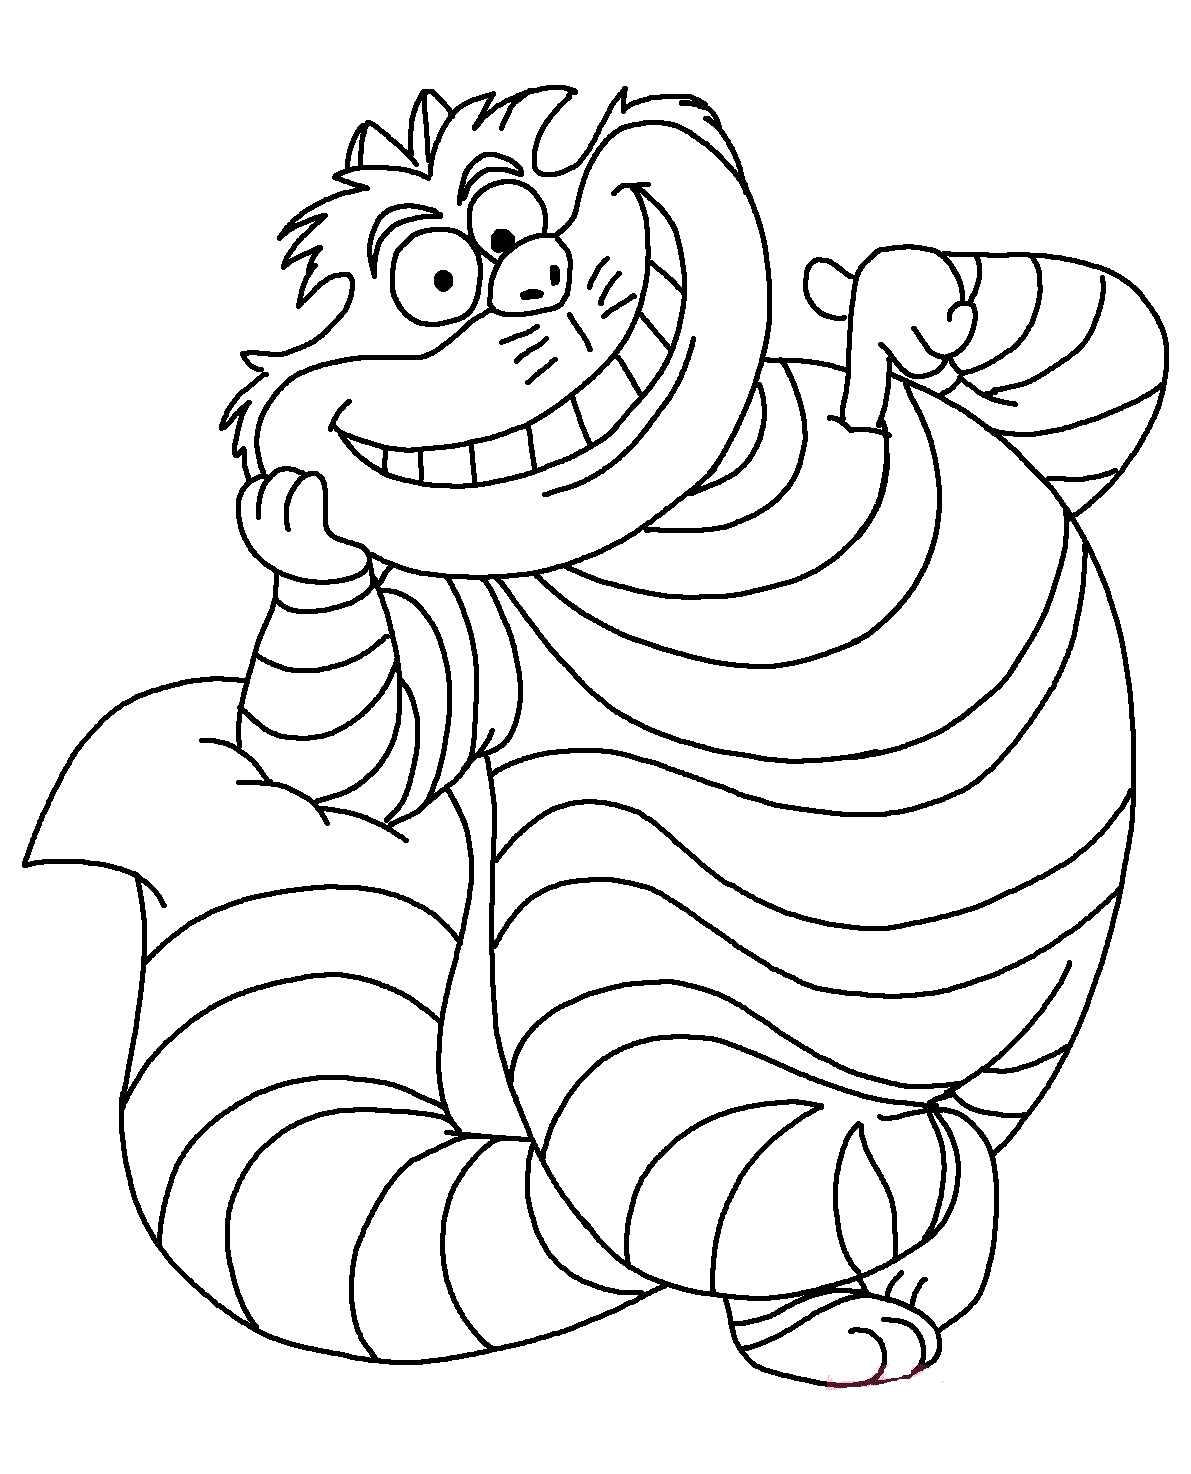 Cheshire Cat Printable Coloring Pages : Coloring page JPG The Cheshire ...